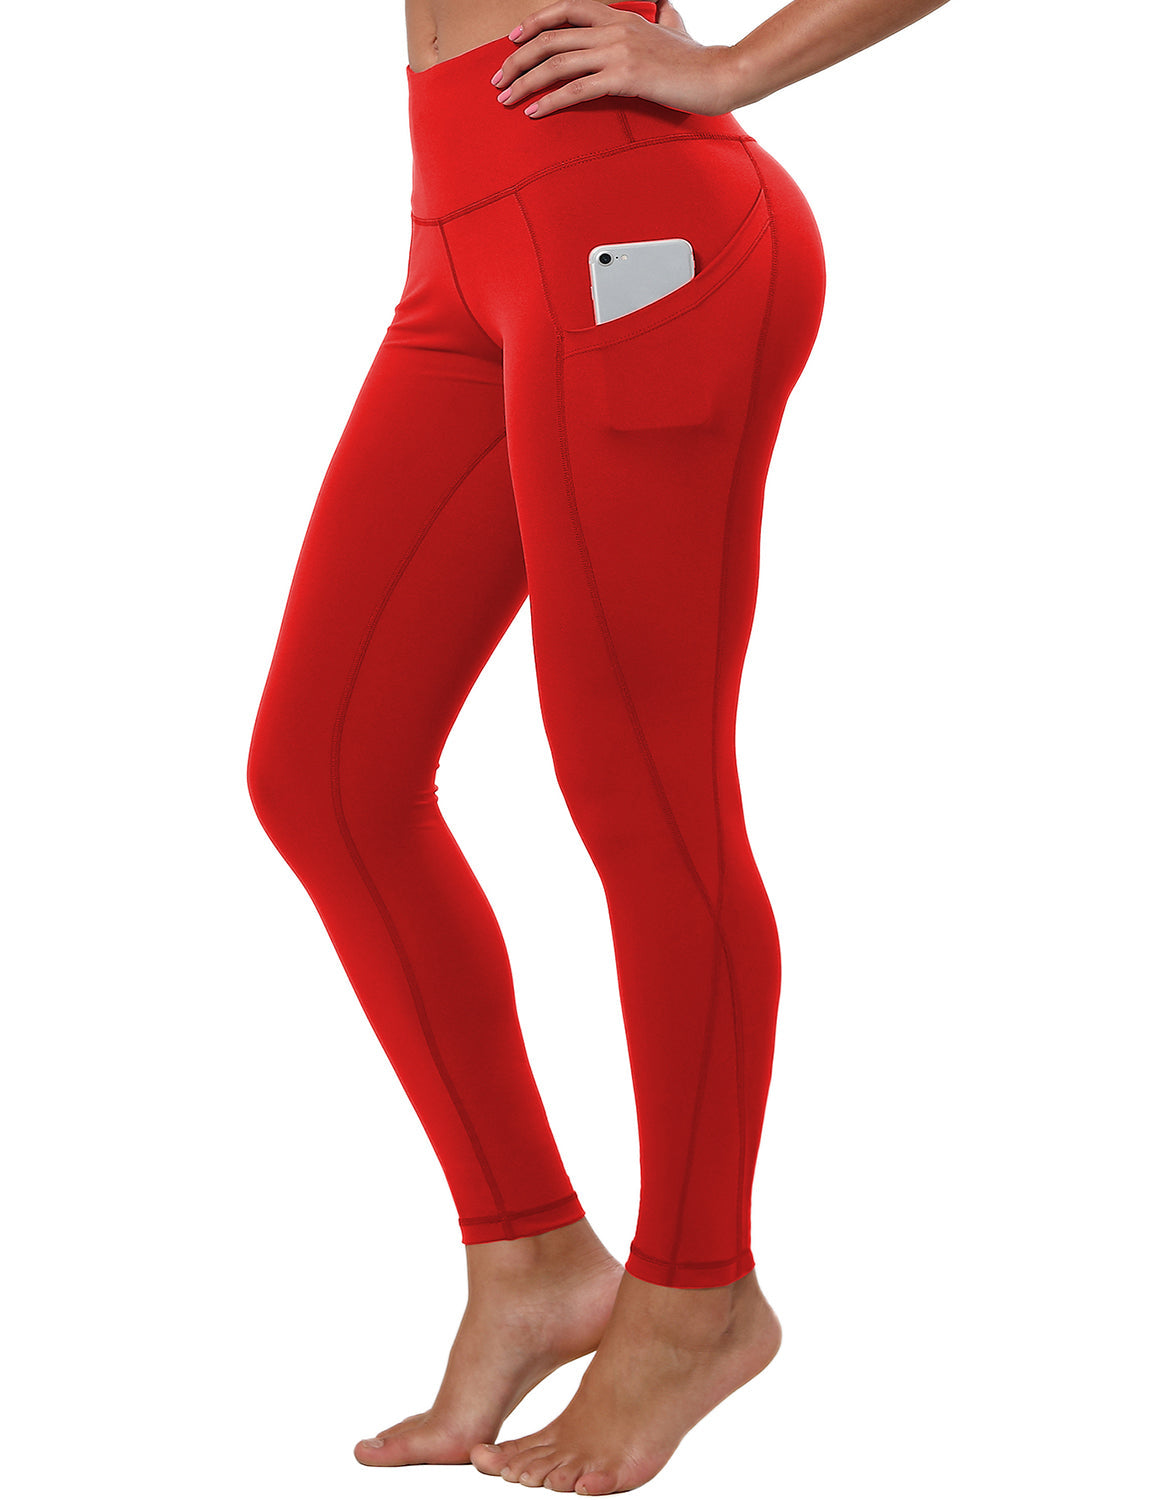 High Waist Side Pockets Pilates Pants scarlet 75% Nylon, 25% Spandex Fabric doesn't attract lint easily 4-way stretch No see-through Moisture-wicking Tummy control Inner pocket